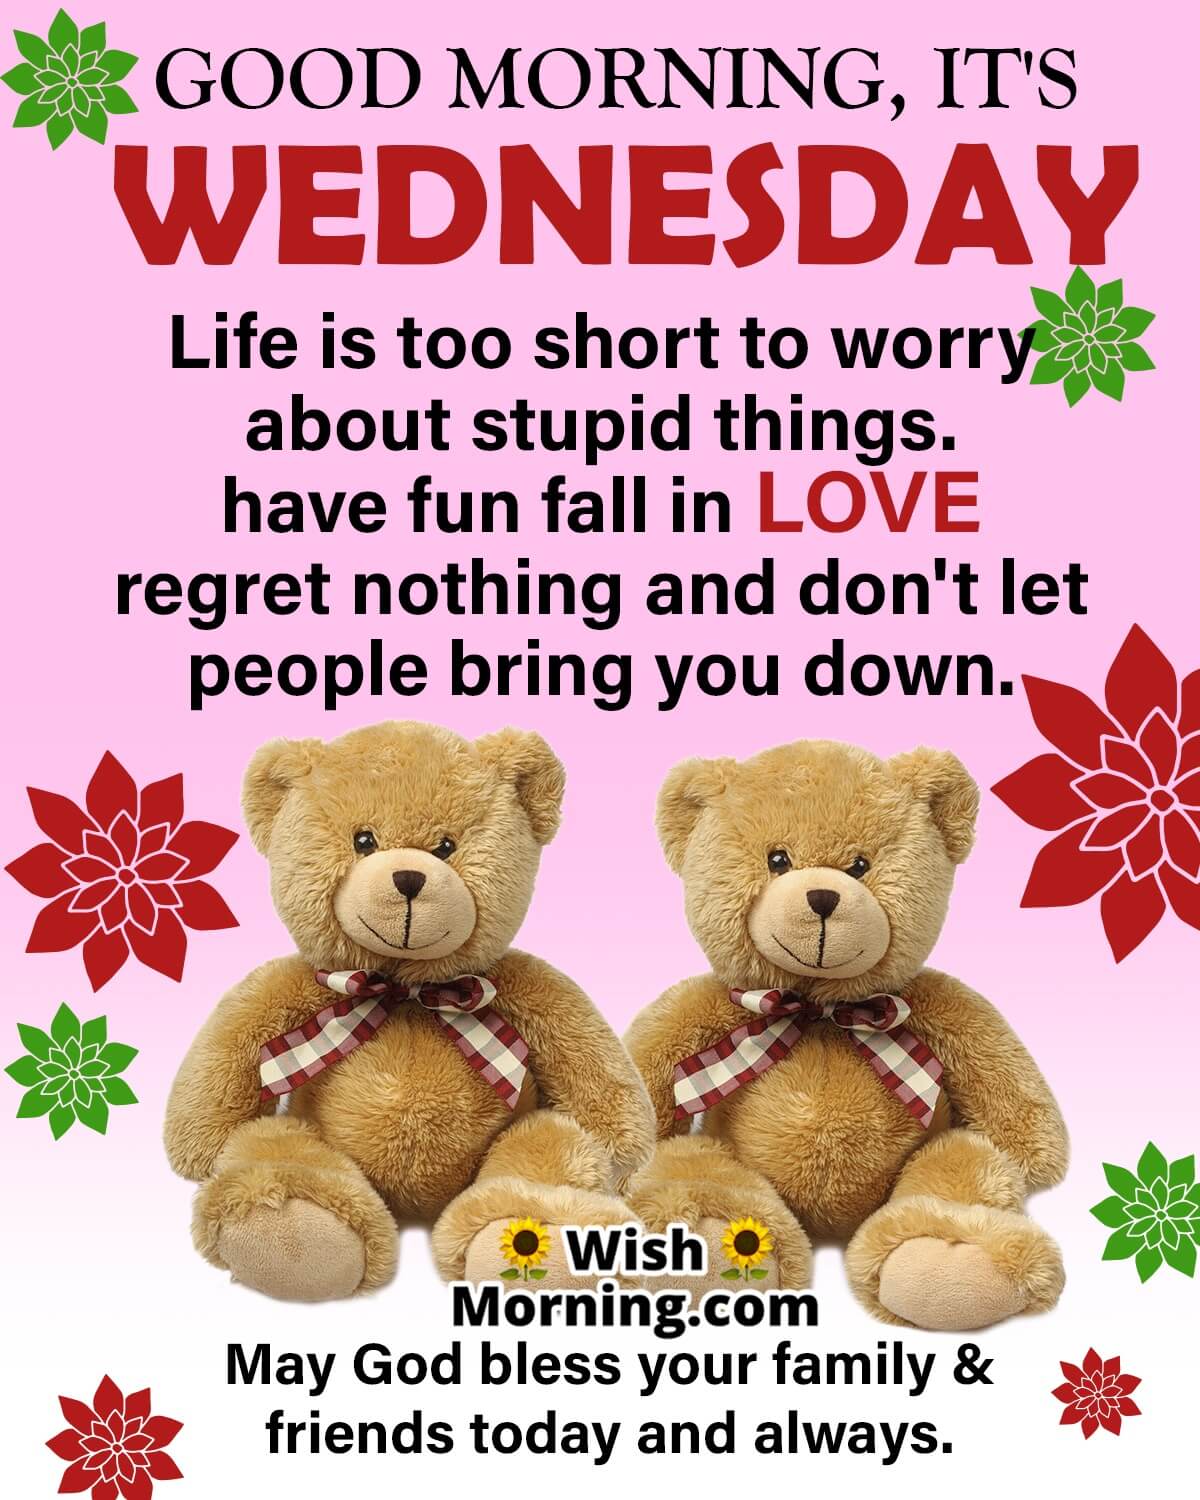 Good Morning Wednesday Life Message For Family Friends